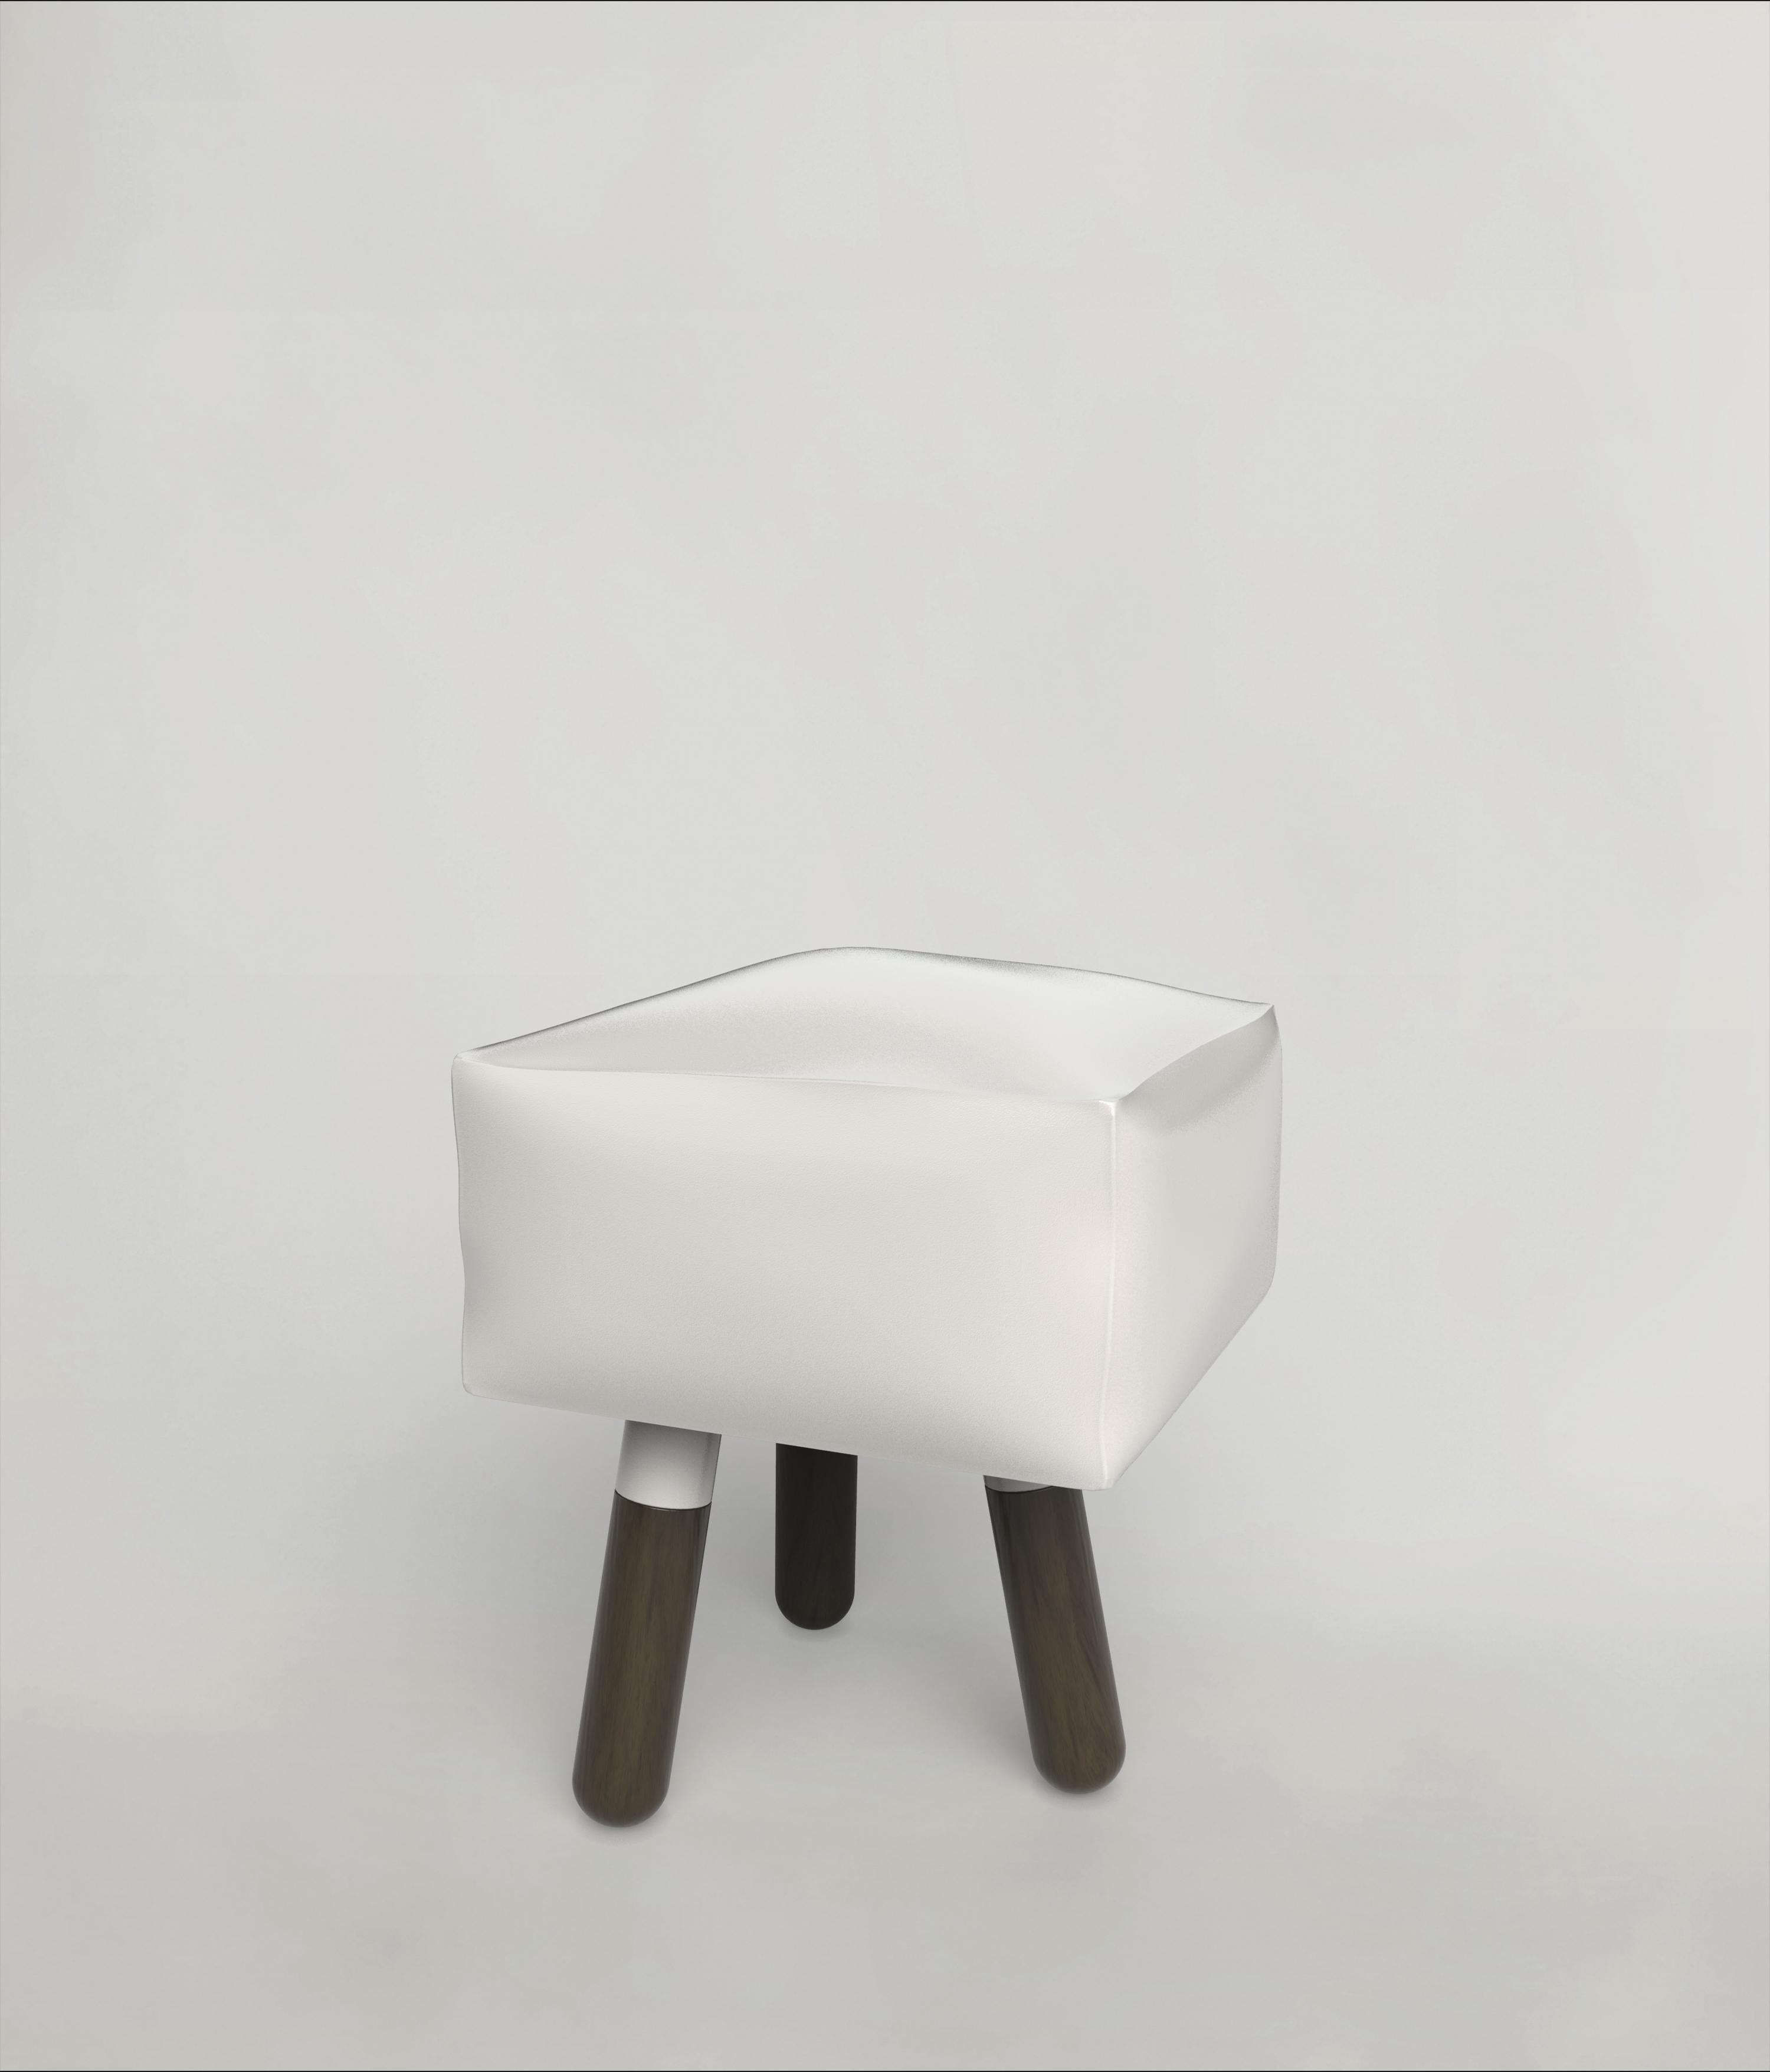 This 21st Century brass stool is a product of Italian craftmanship, the unique effect is created by the expansion of ice within the seating. The stool is part of the collectible design language Icenine that has been developed by the Edizione